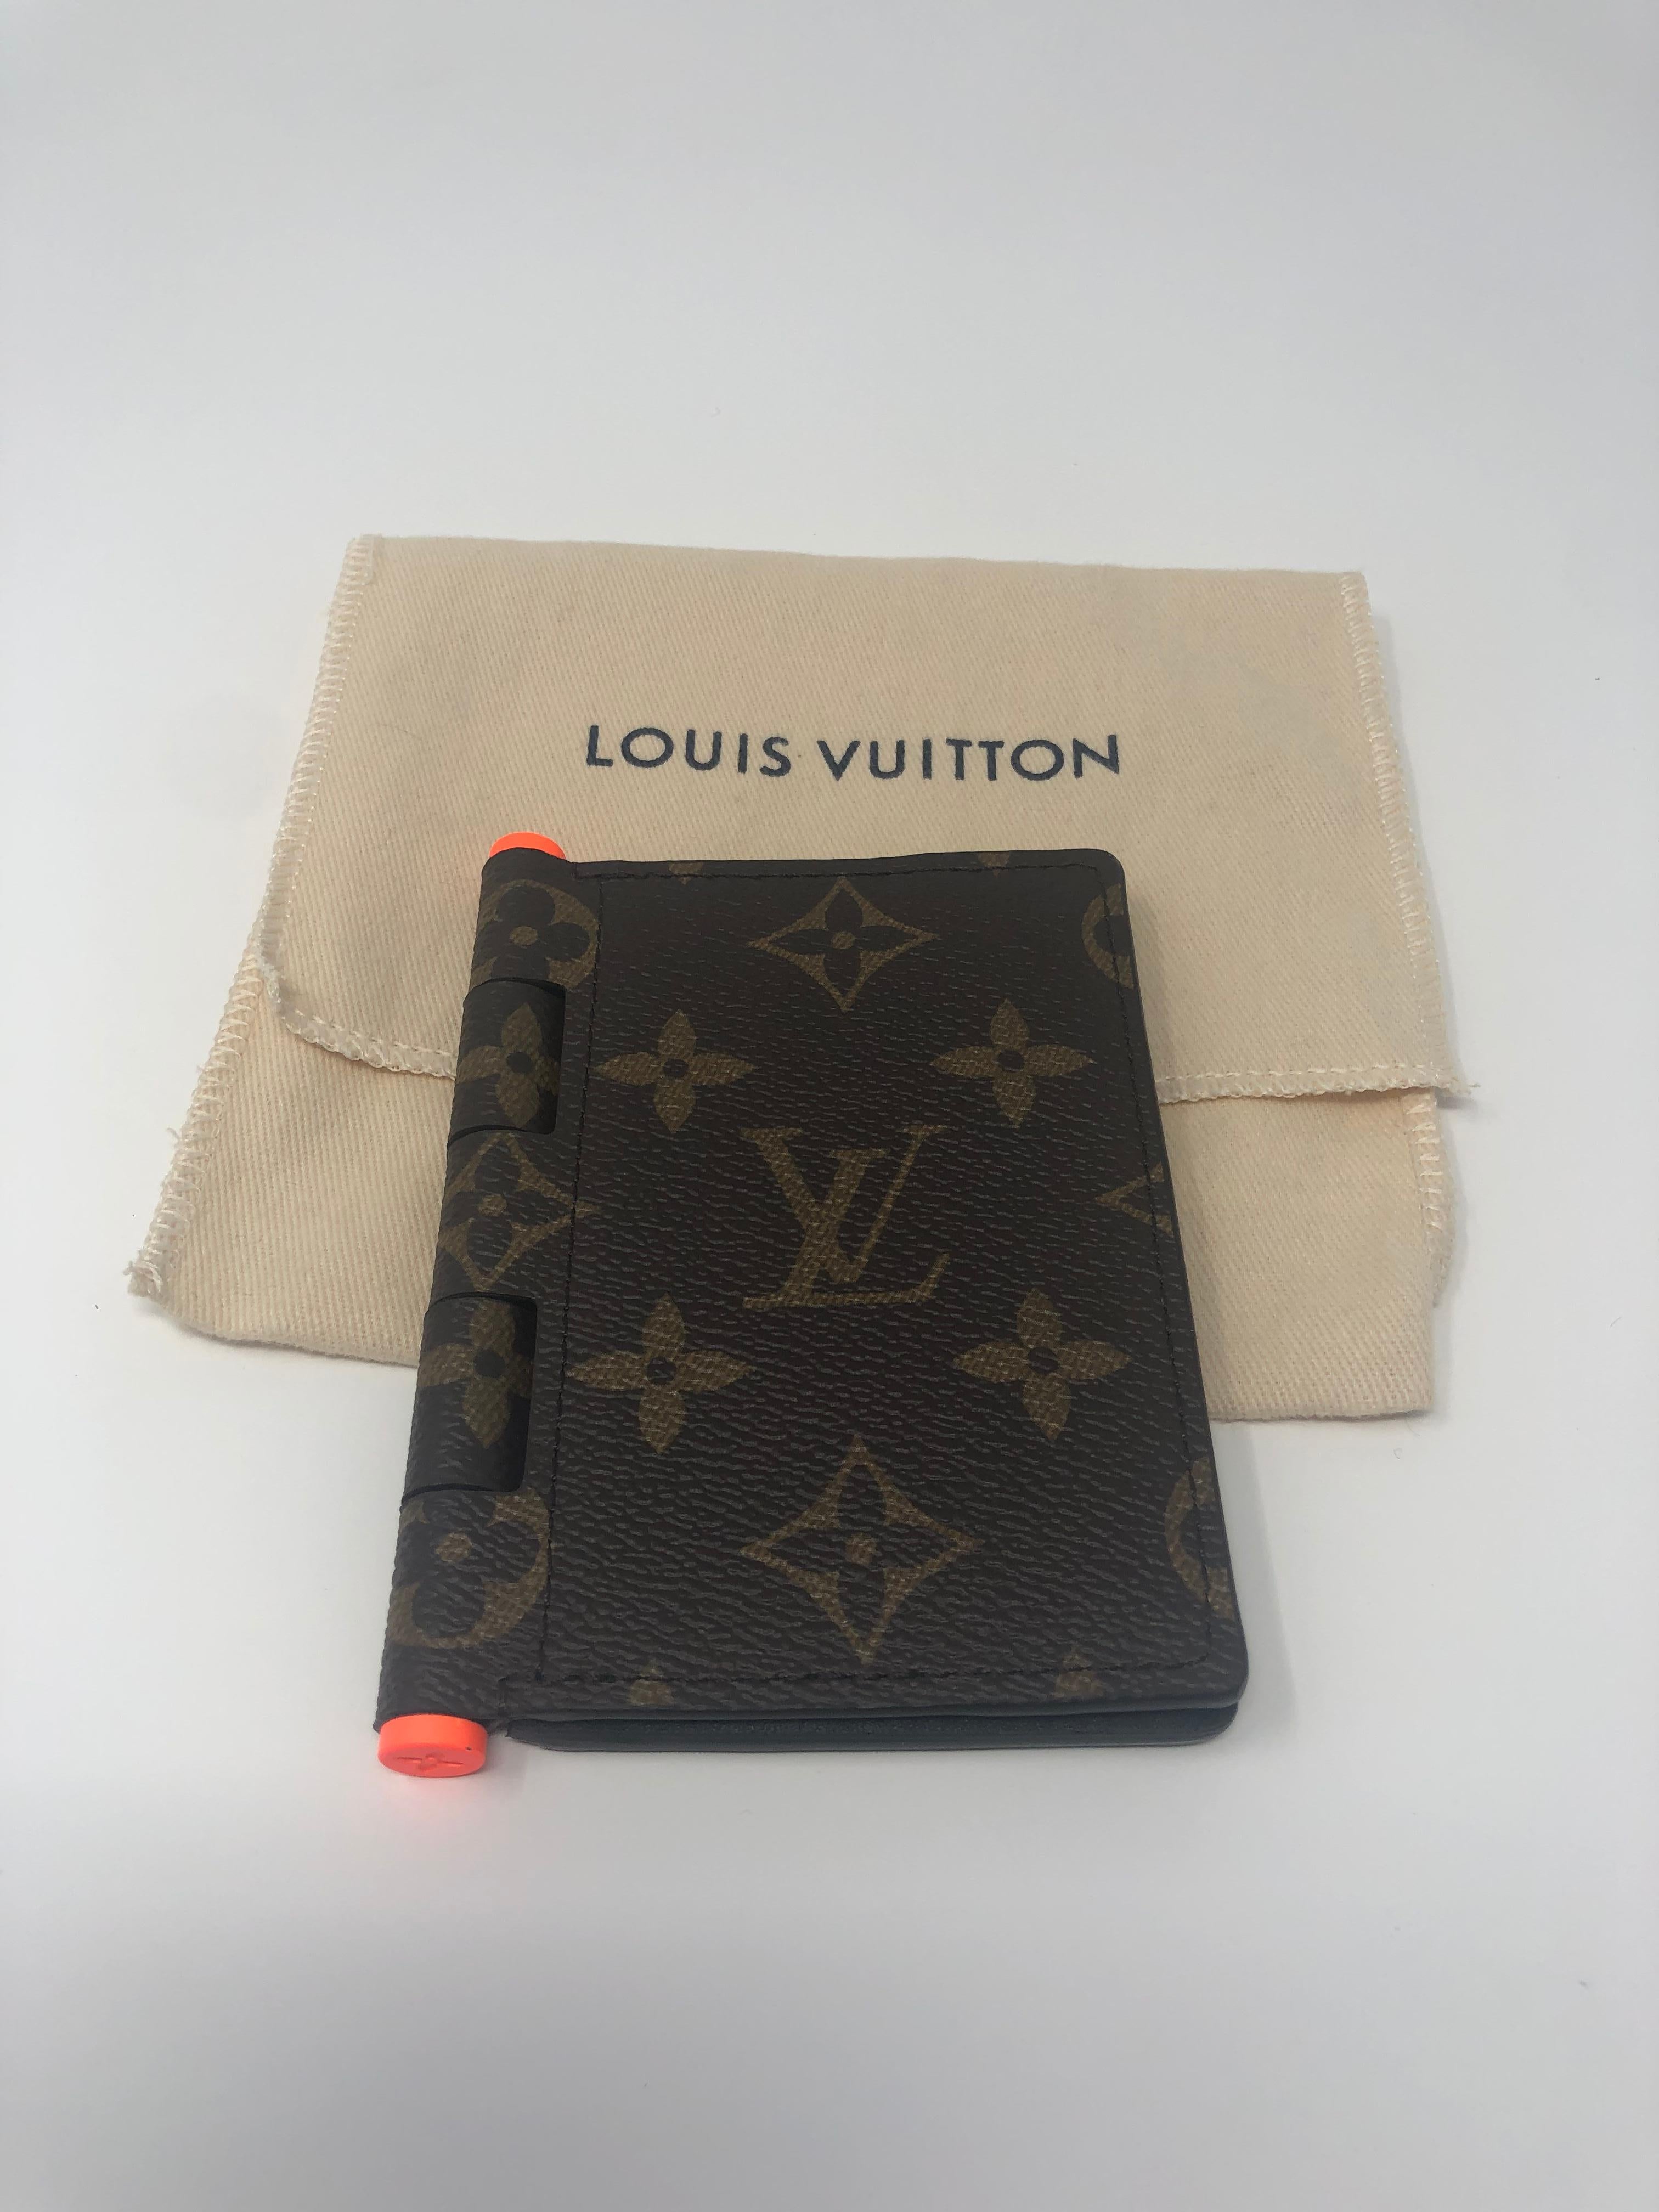 Louis Vuitton Solar Hinge Pocket Organizer designed by Virgil Abloh. From Virgil's first line Spring/ Summer 2019 Collection. True collector's piece. Brand new and limited. Includes dut cover and box. Guaranteed authentic. 